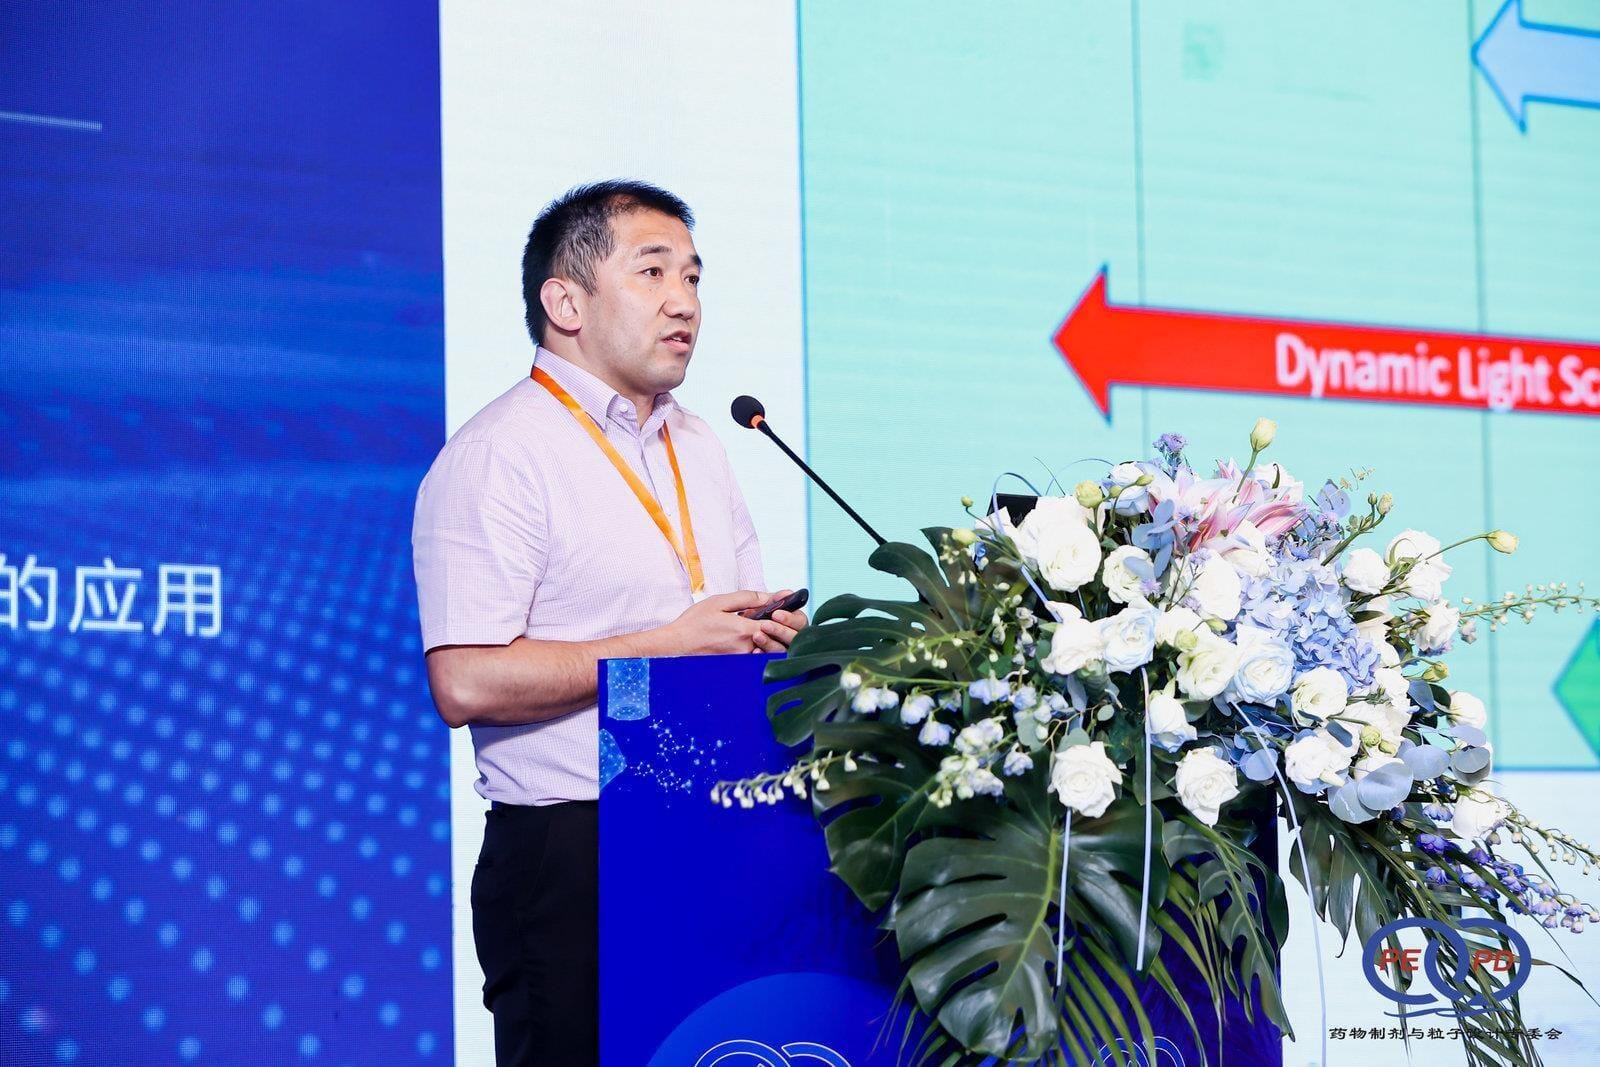 Report on laser diffraction vs. dynamic light scattering by Dr. Brian Li at forum